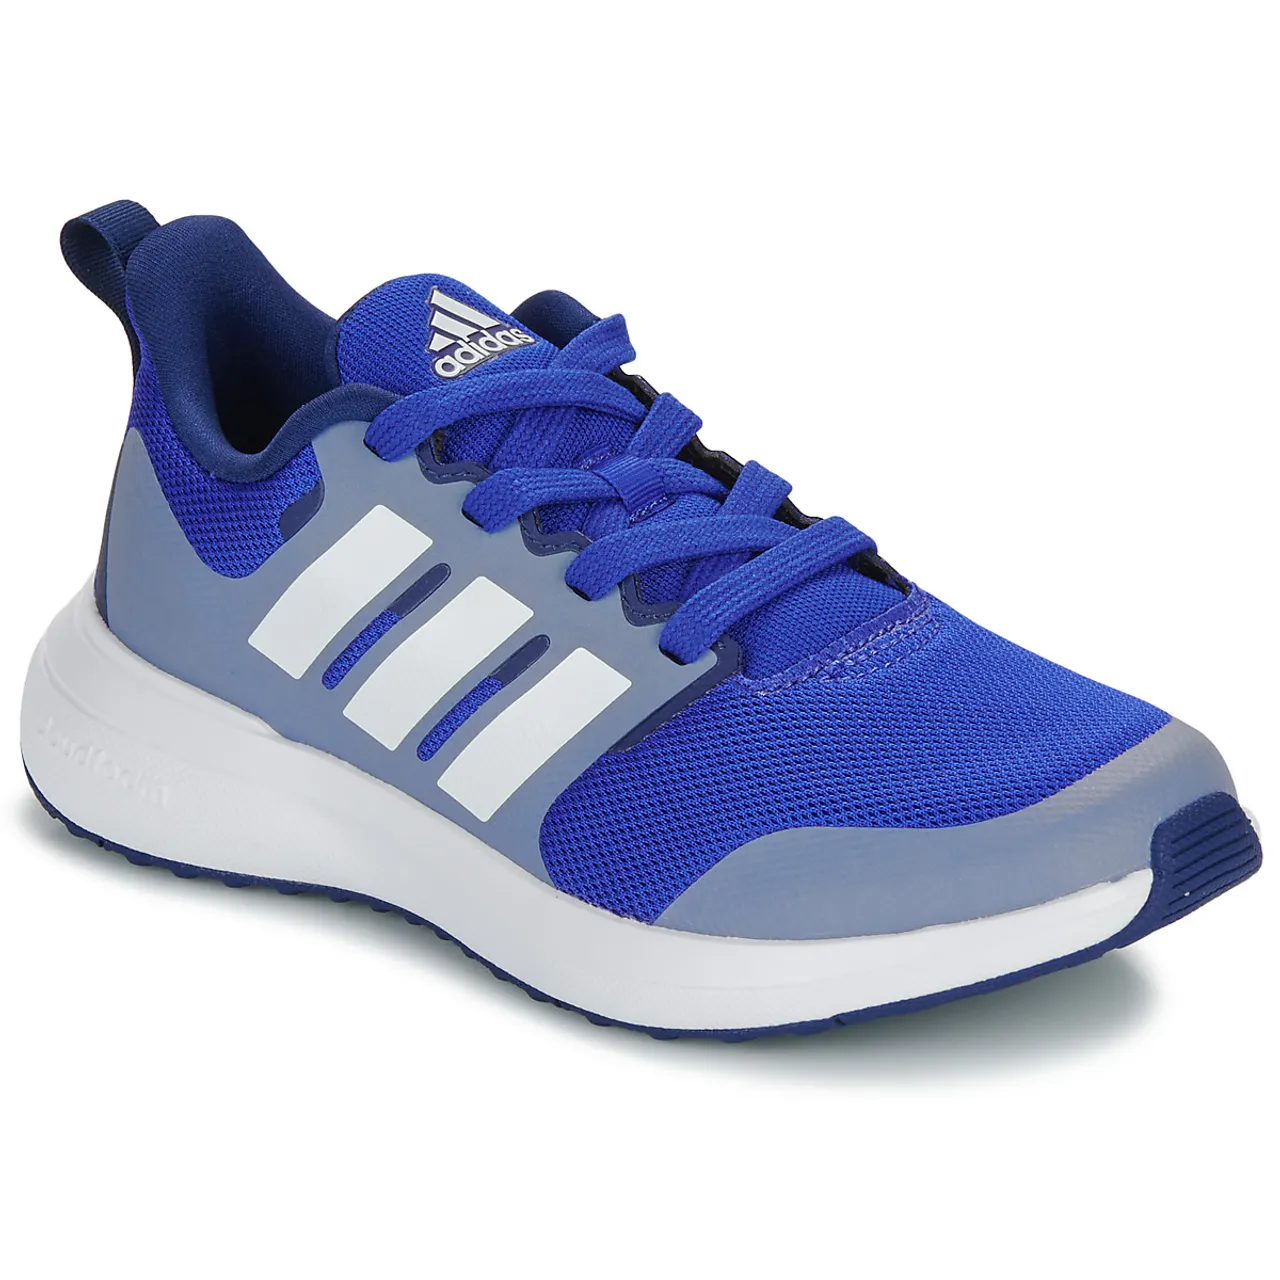 adidas  FortaRun 2.0 K  boys's Children's Shoes (Trainers) in Blue